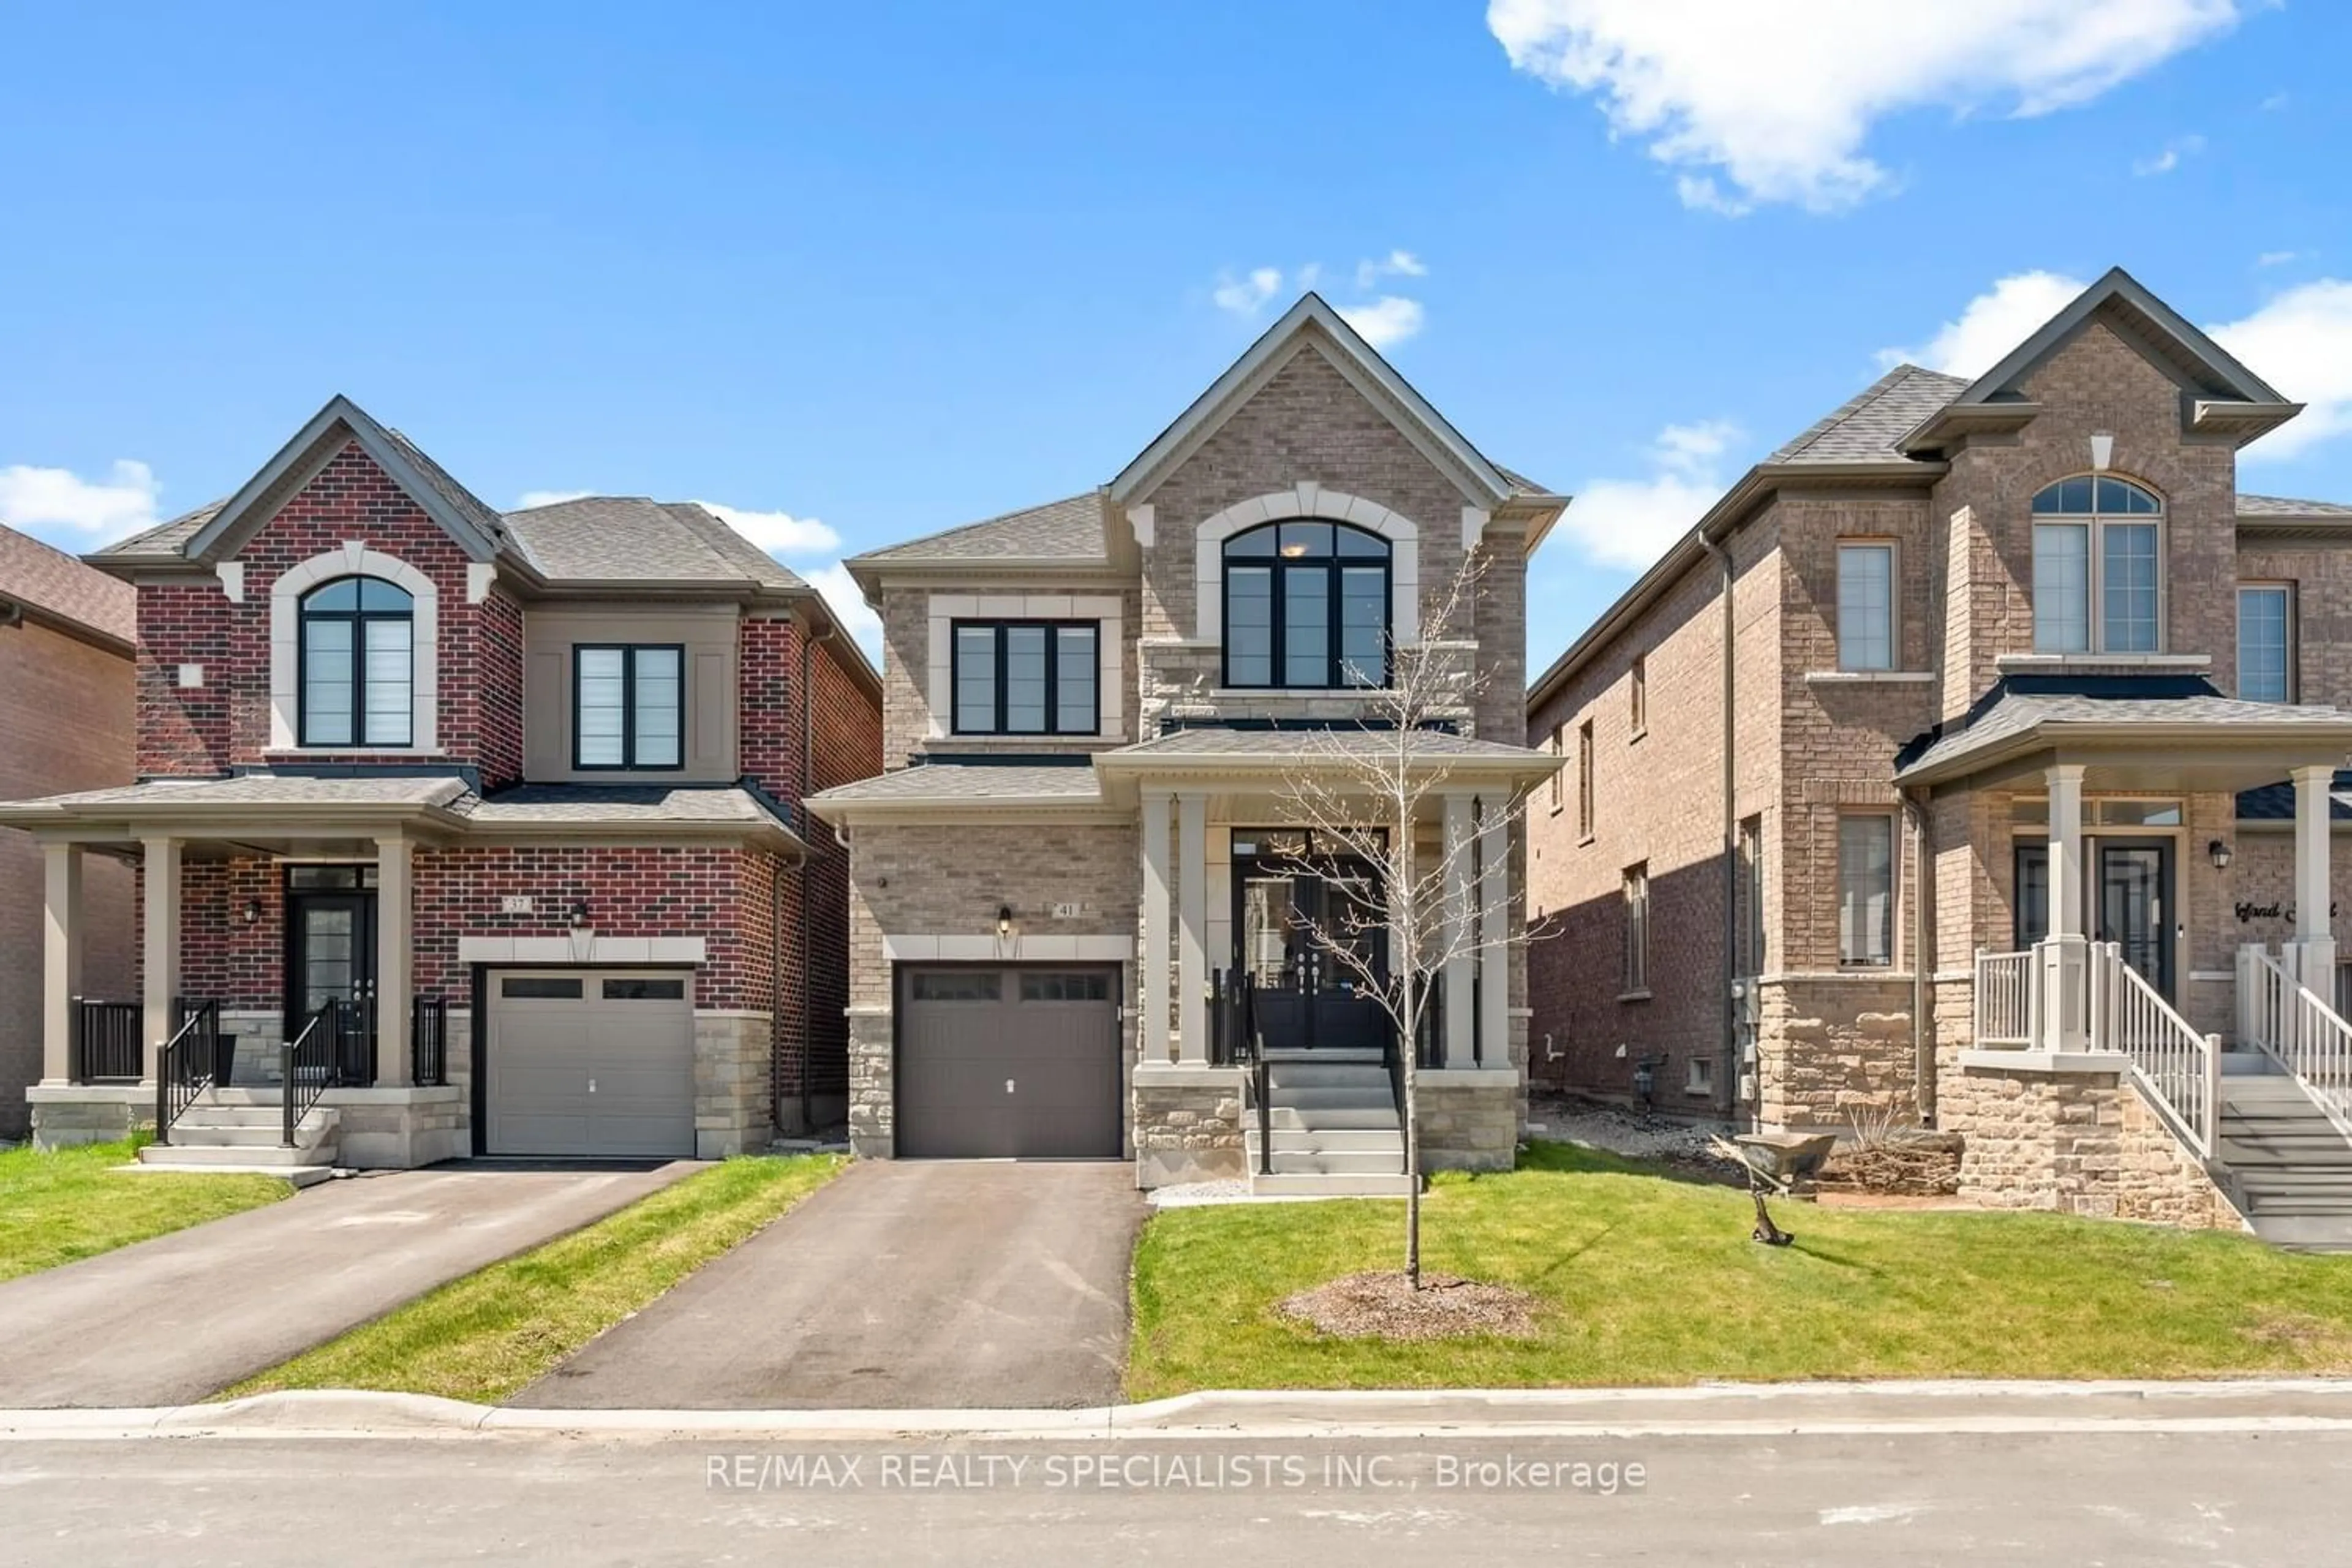 Home with brick exterior material for 41 Bellefond St, Vaughan Ontario L4H 4T9